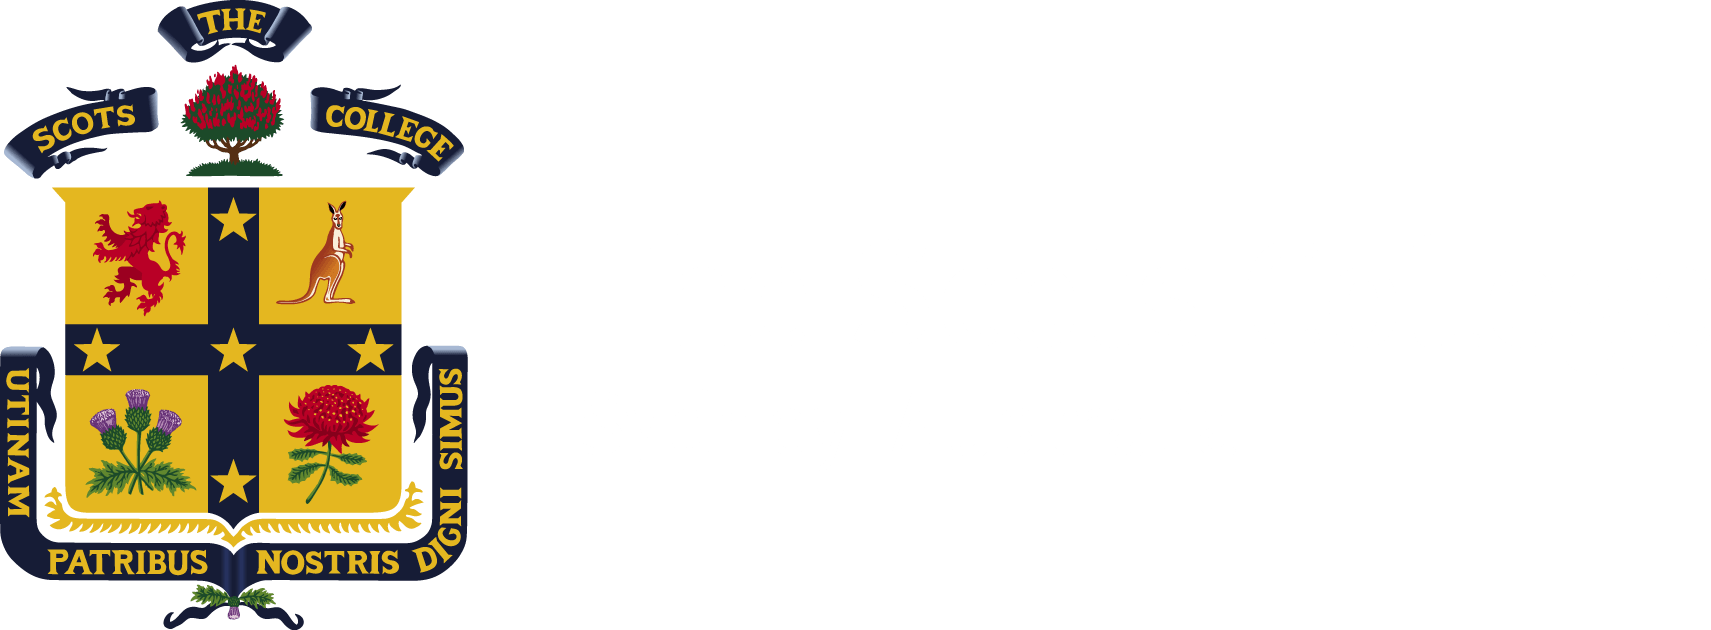 Scots Logo - The Scots College. Independent day and boarding school for boys